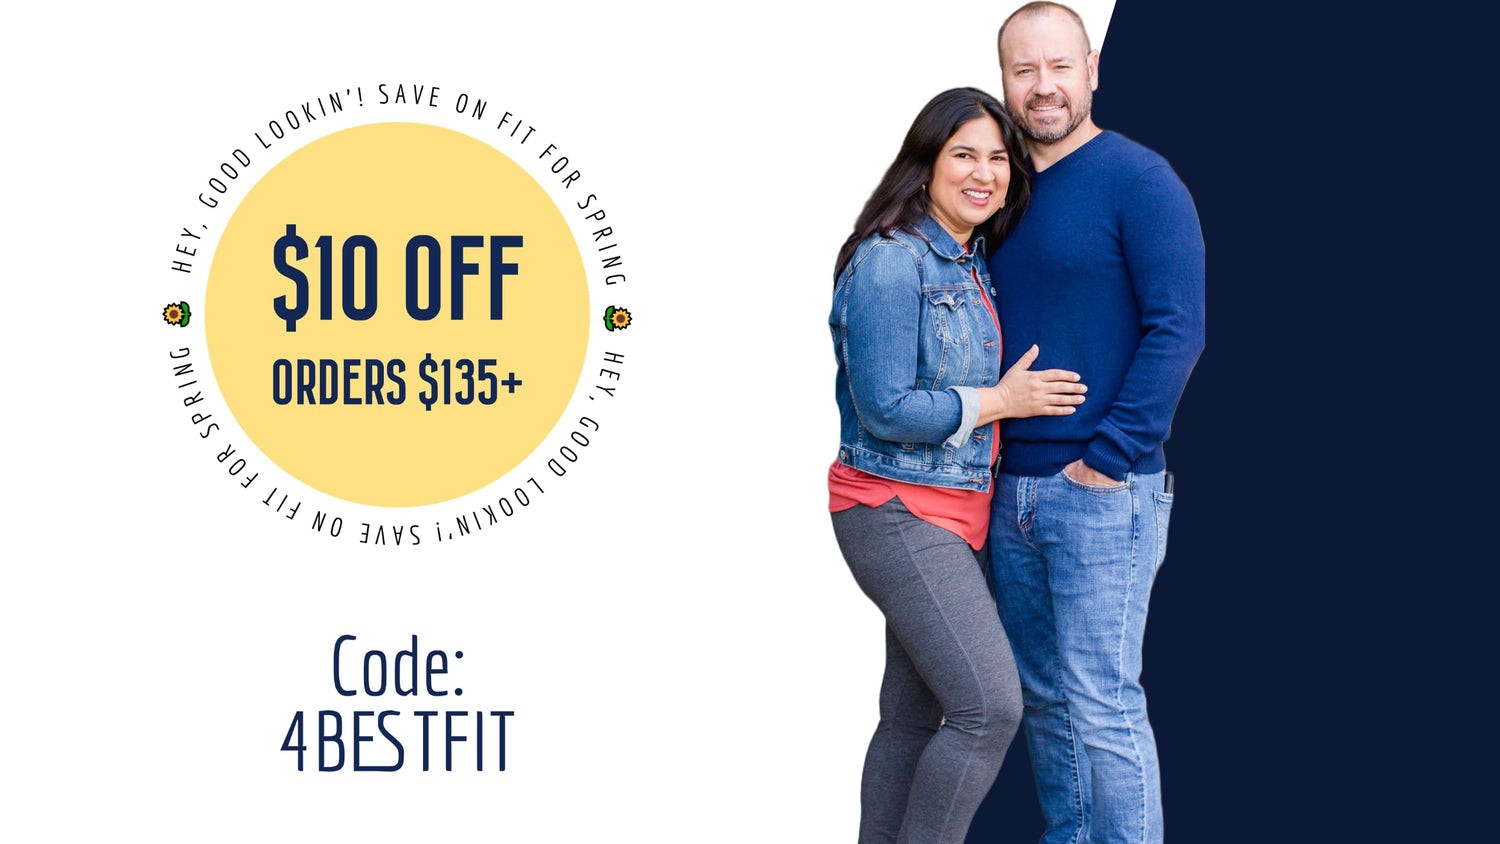 Tall and Short Mens PLUS Tall Womens & Petite Women's Sizes are On Sale Now at FORtheFIT - Tall Shirts and Pants ; Tall Denim. Tall Jeans, Tall Athletic Pants, Sweats and Loungewear. Petite Womens Pants and Tall Sizes. Short and Long Lengths. Short Men's Jeans. Clearance Savings